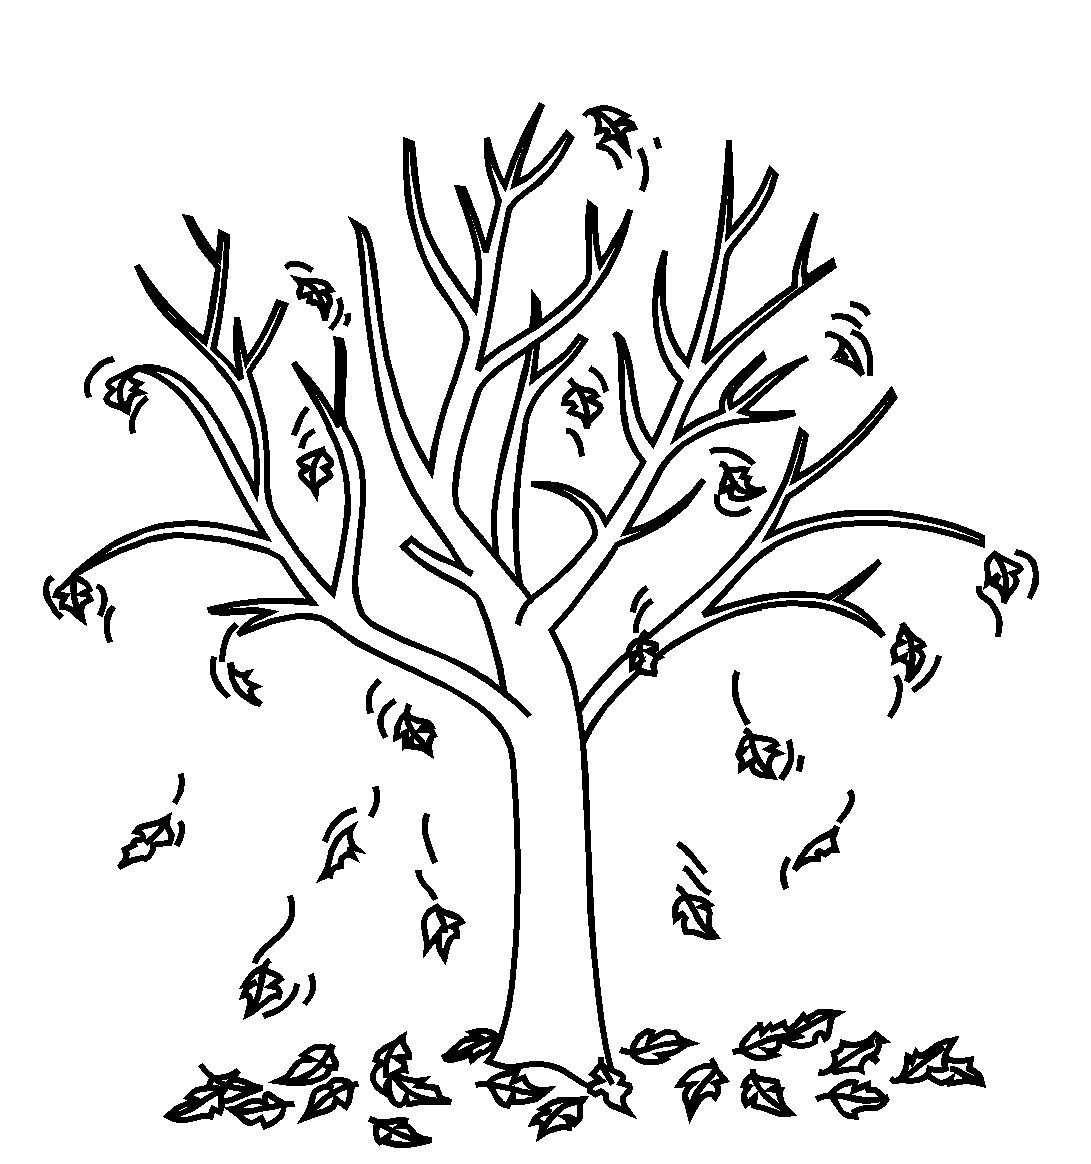 colouring pages of autumn trees fall leaves coloring pages best coloring pages for kids autumn pages trees of colouring 